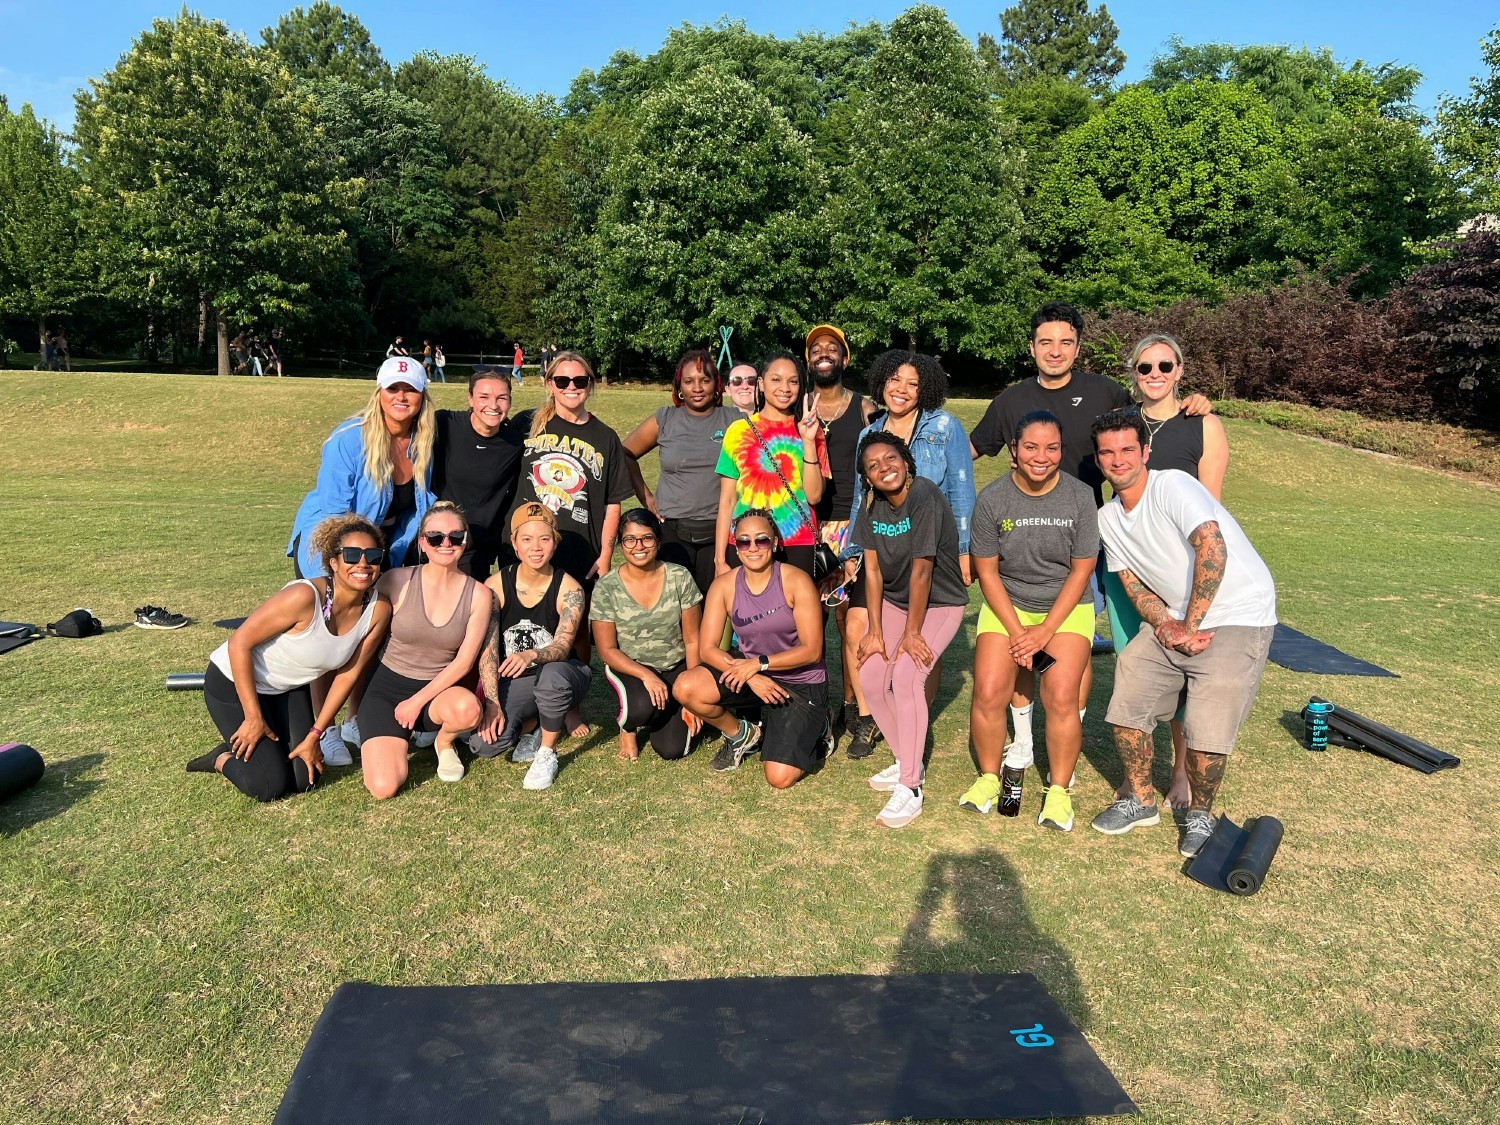 Company wide yoga event in the park!